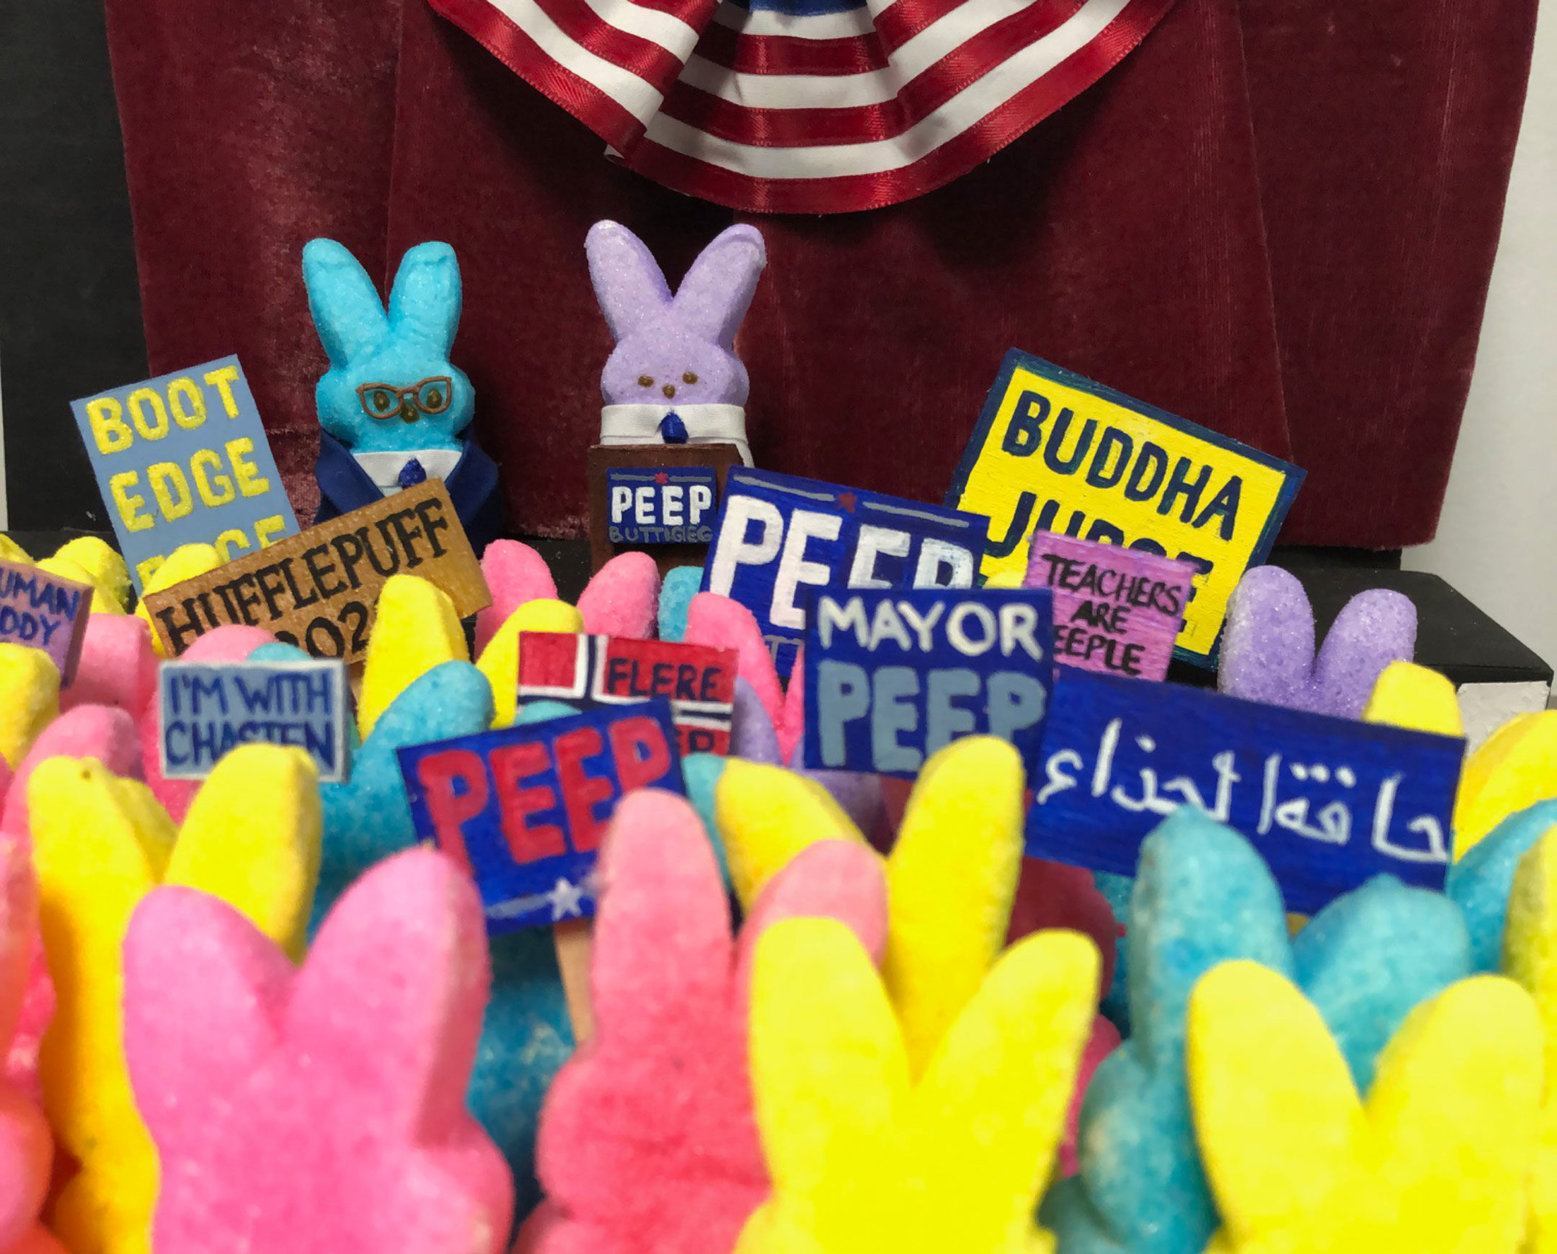 A recent Peeps diorama Martin made featuring Pete Buttigieg was retweeted by the presidential hopeful. (WTOP/Rachel Nania)